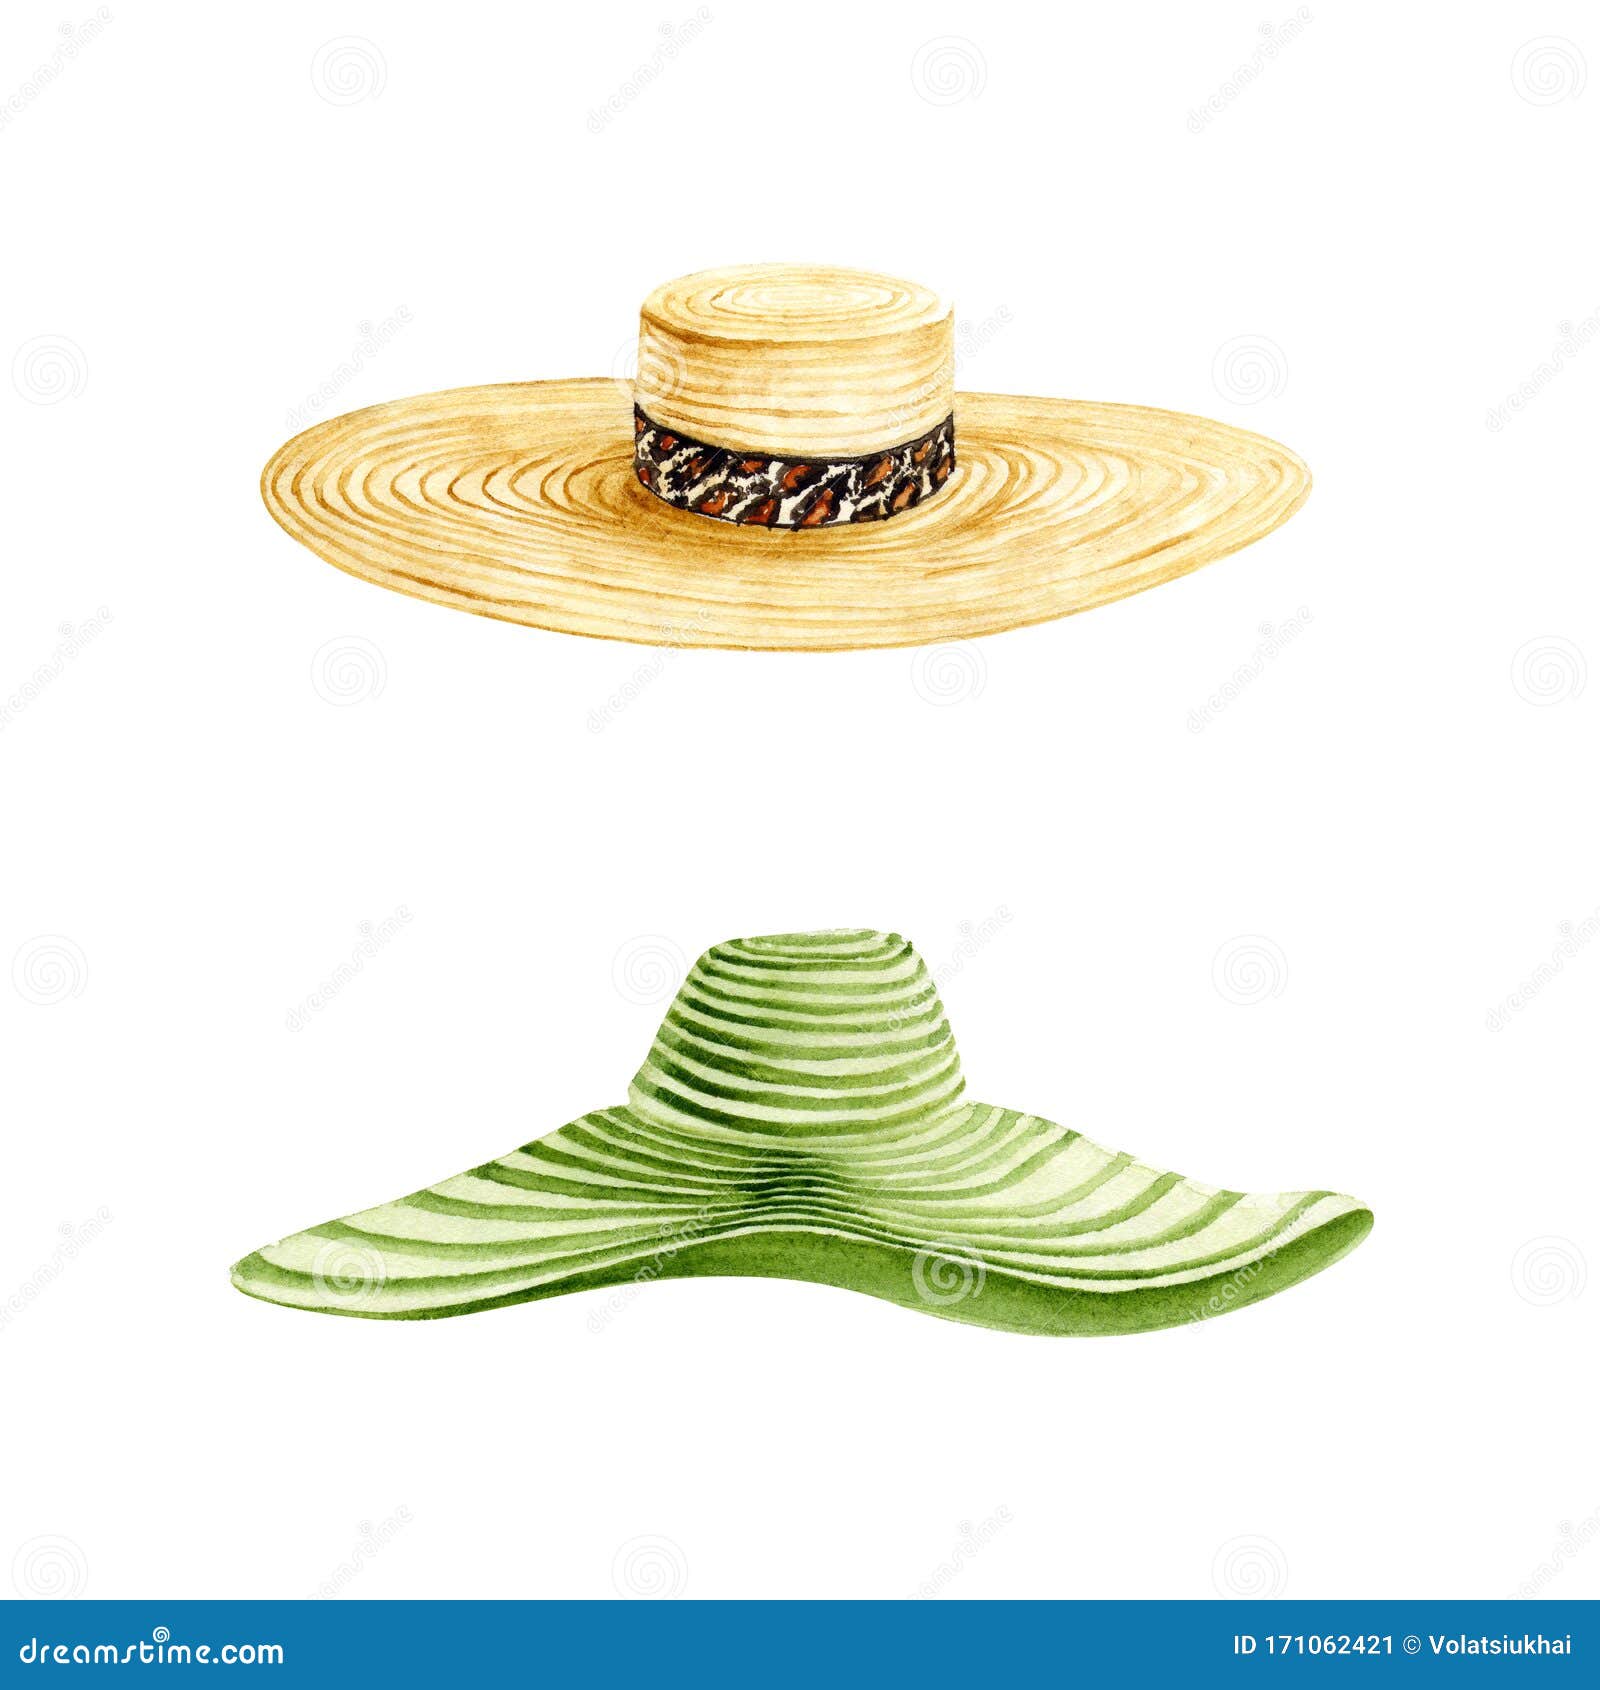 Watercolor Hats. Summer Vacation Items Isolated on White. Greenery ...